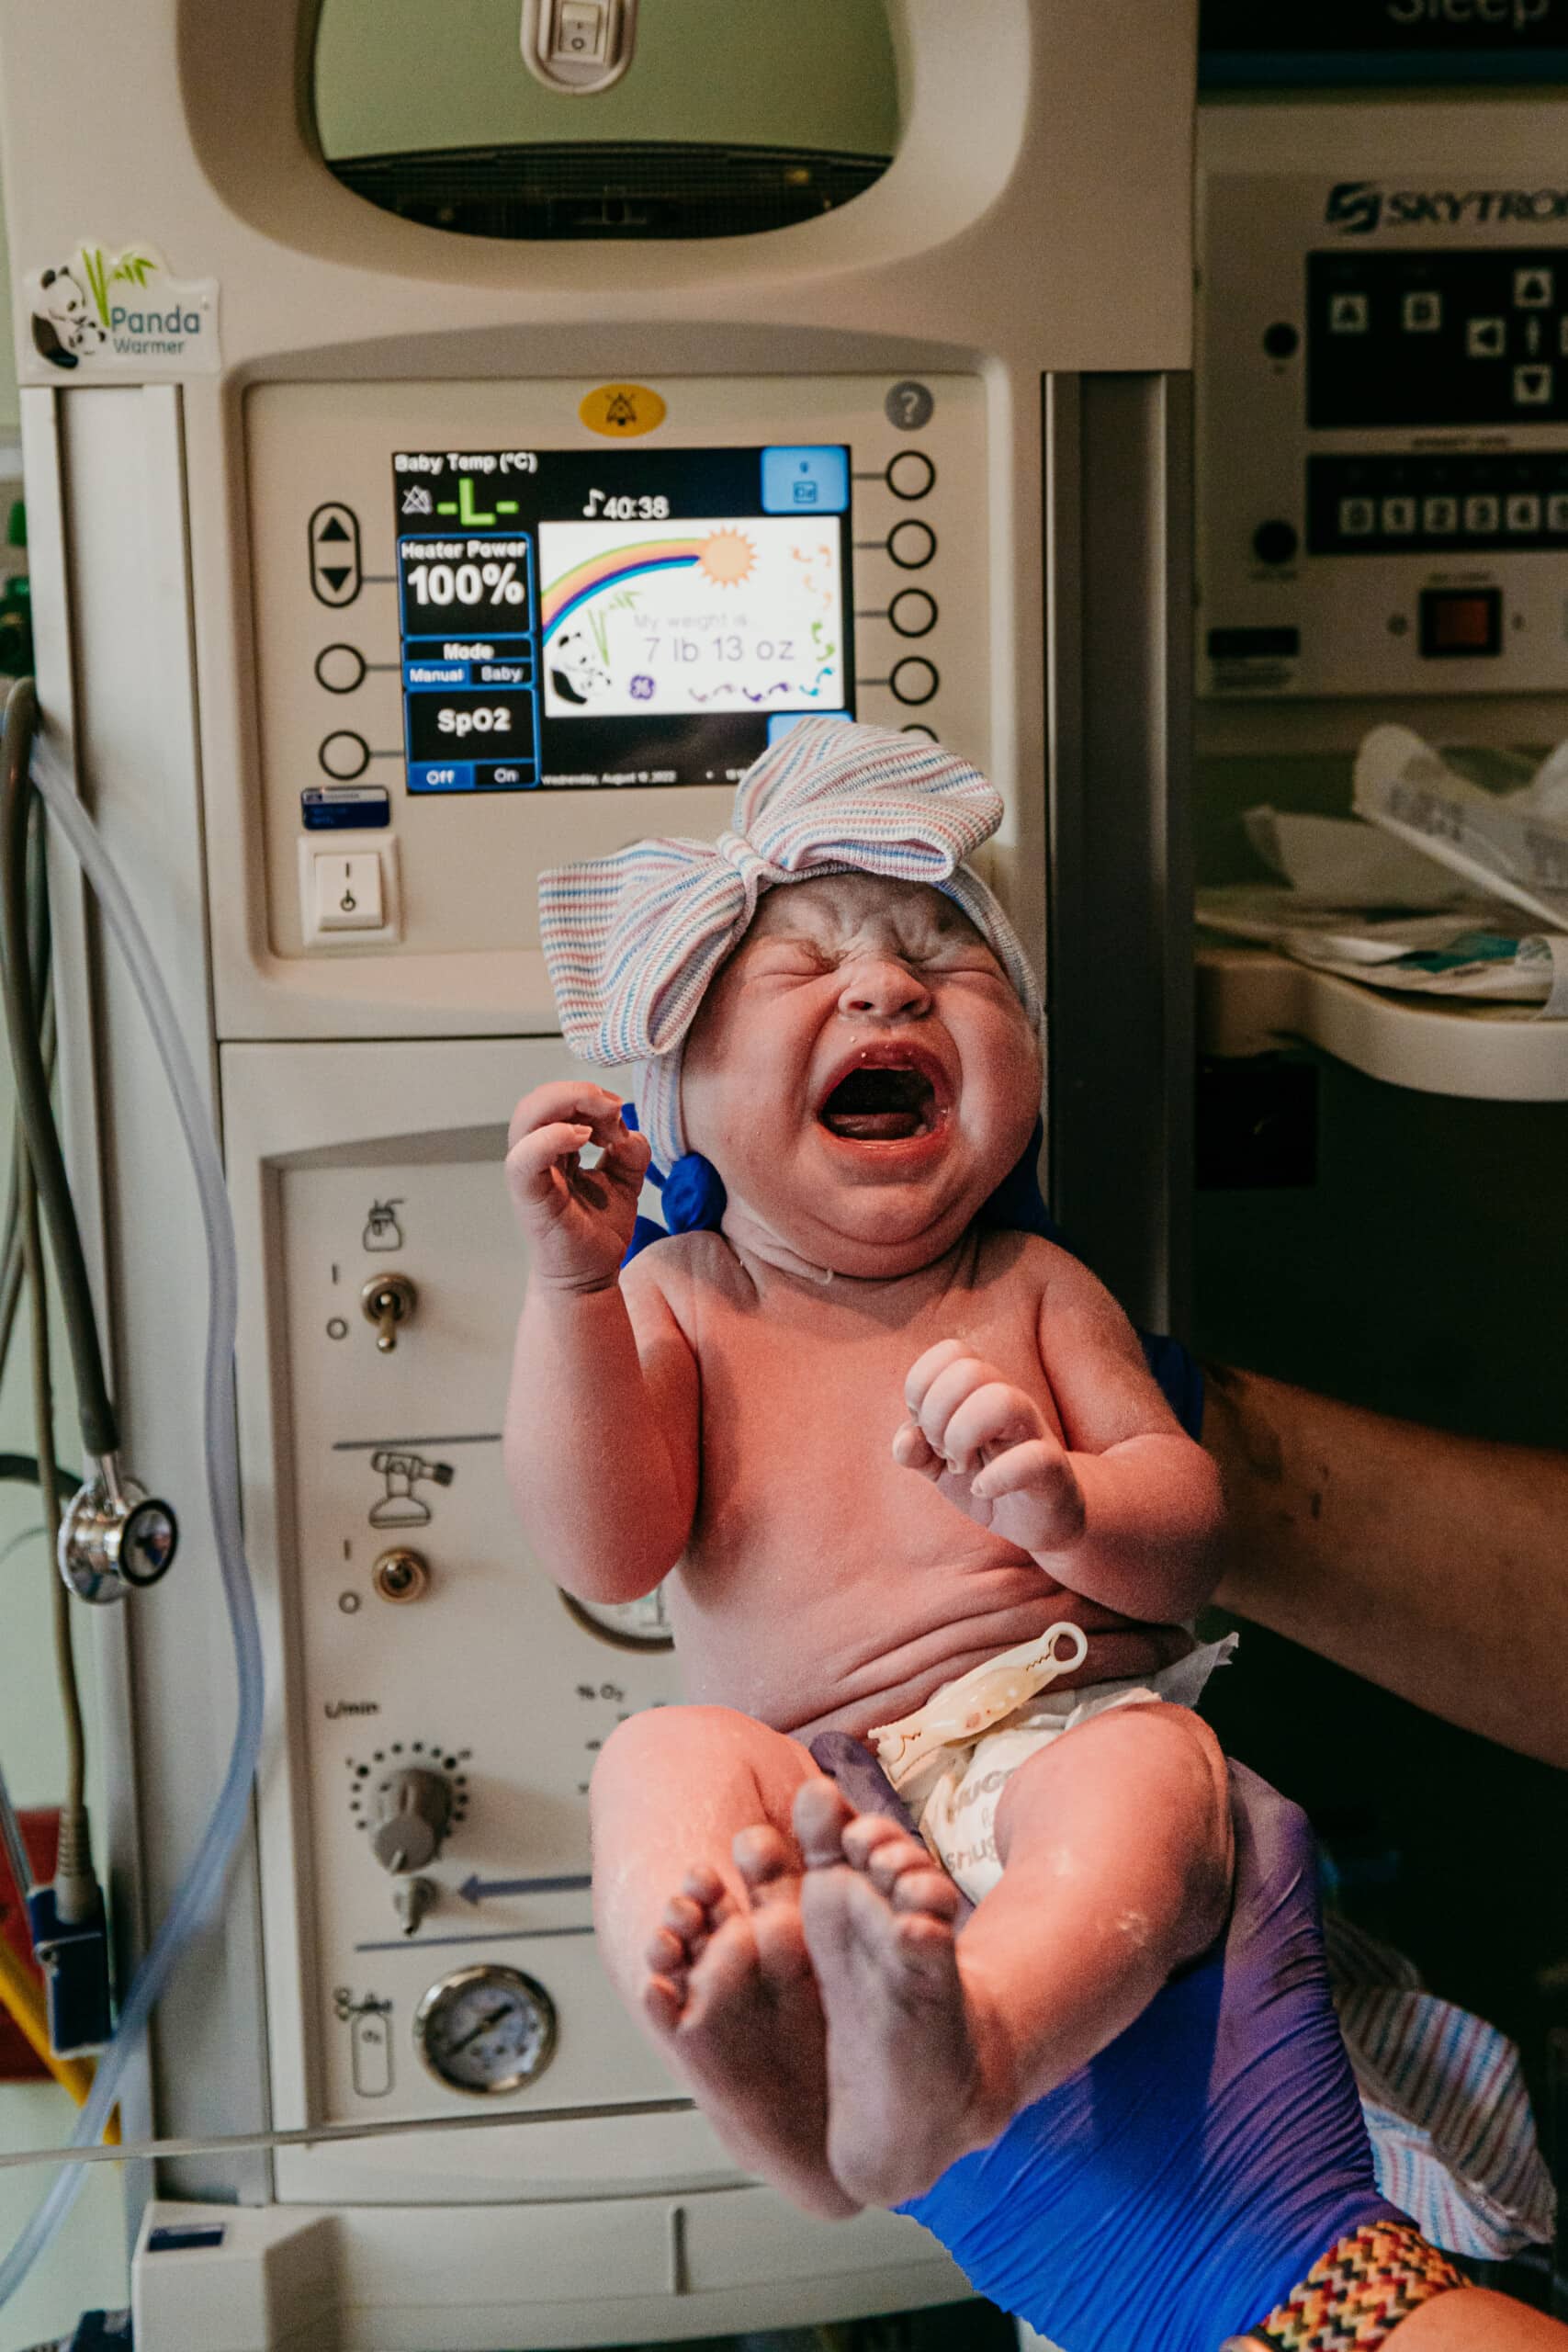 15 Photos to Capture During Baby's First 24 Hours